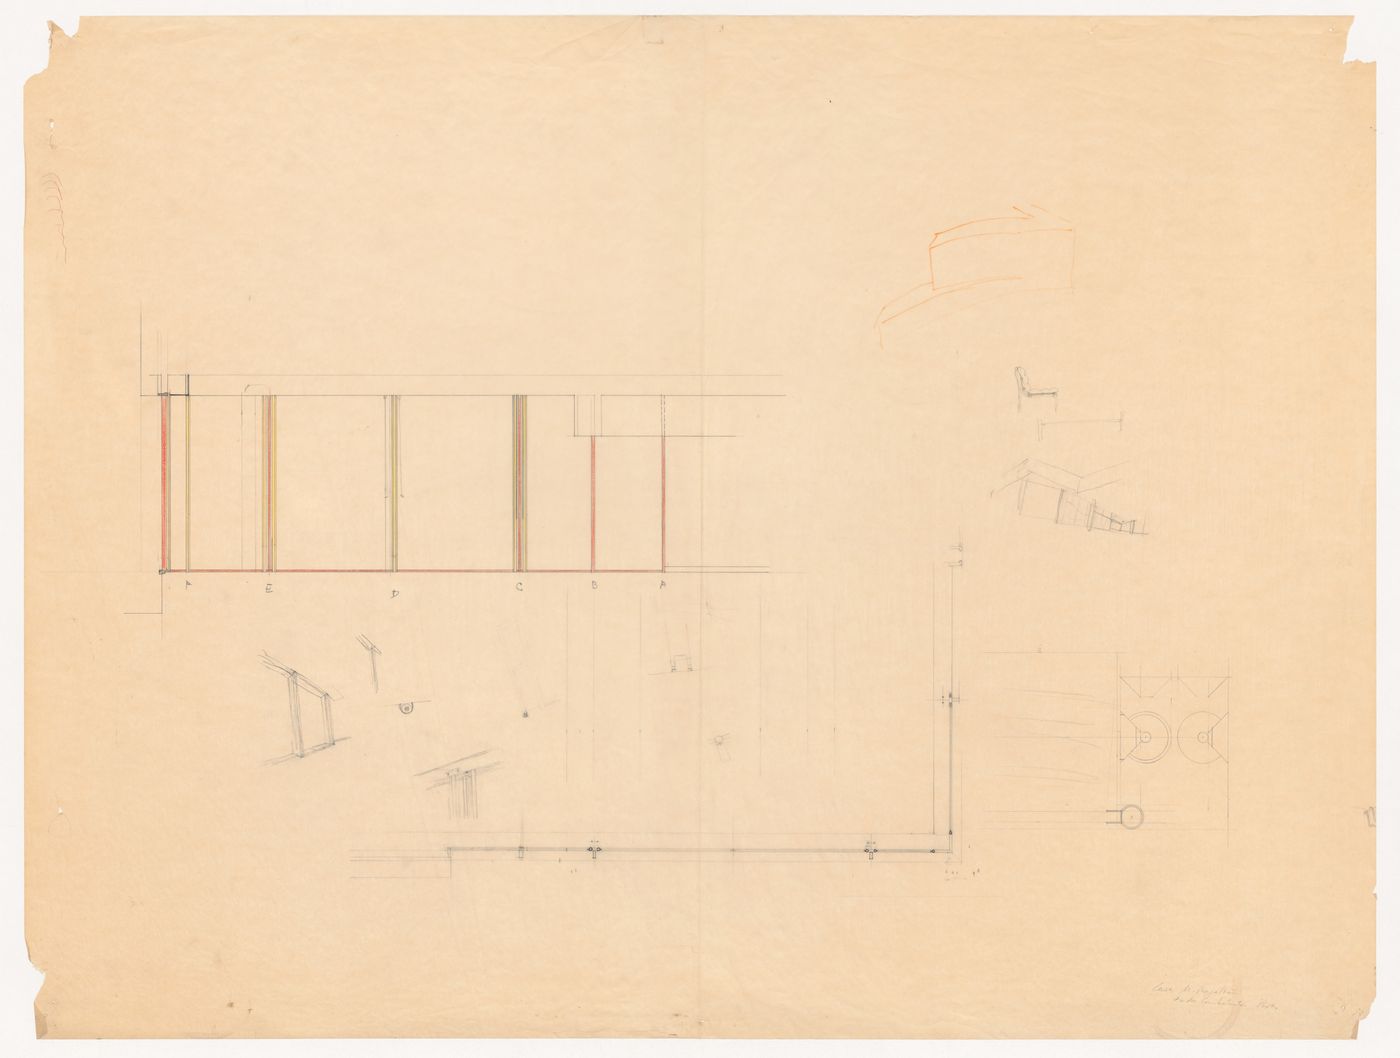 Partial elevation, partial plan and sketches for Casa Manuel Magalhães, Porto